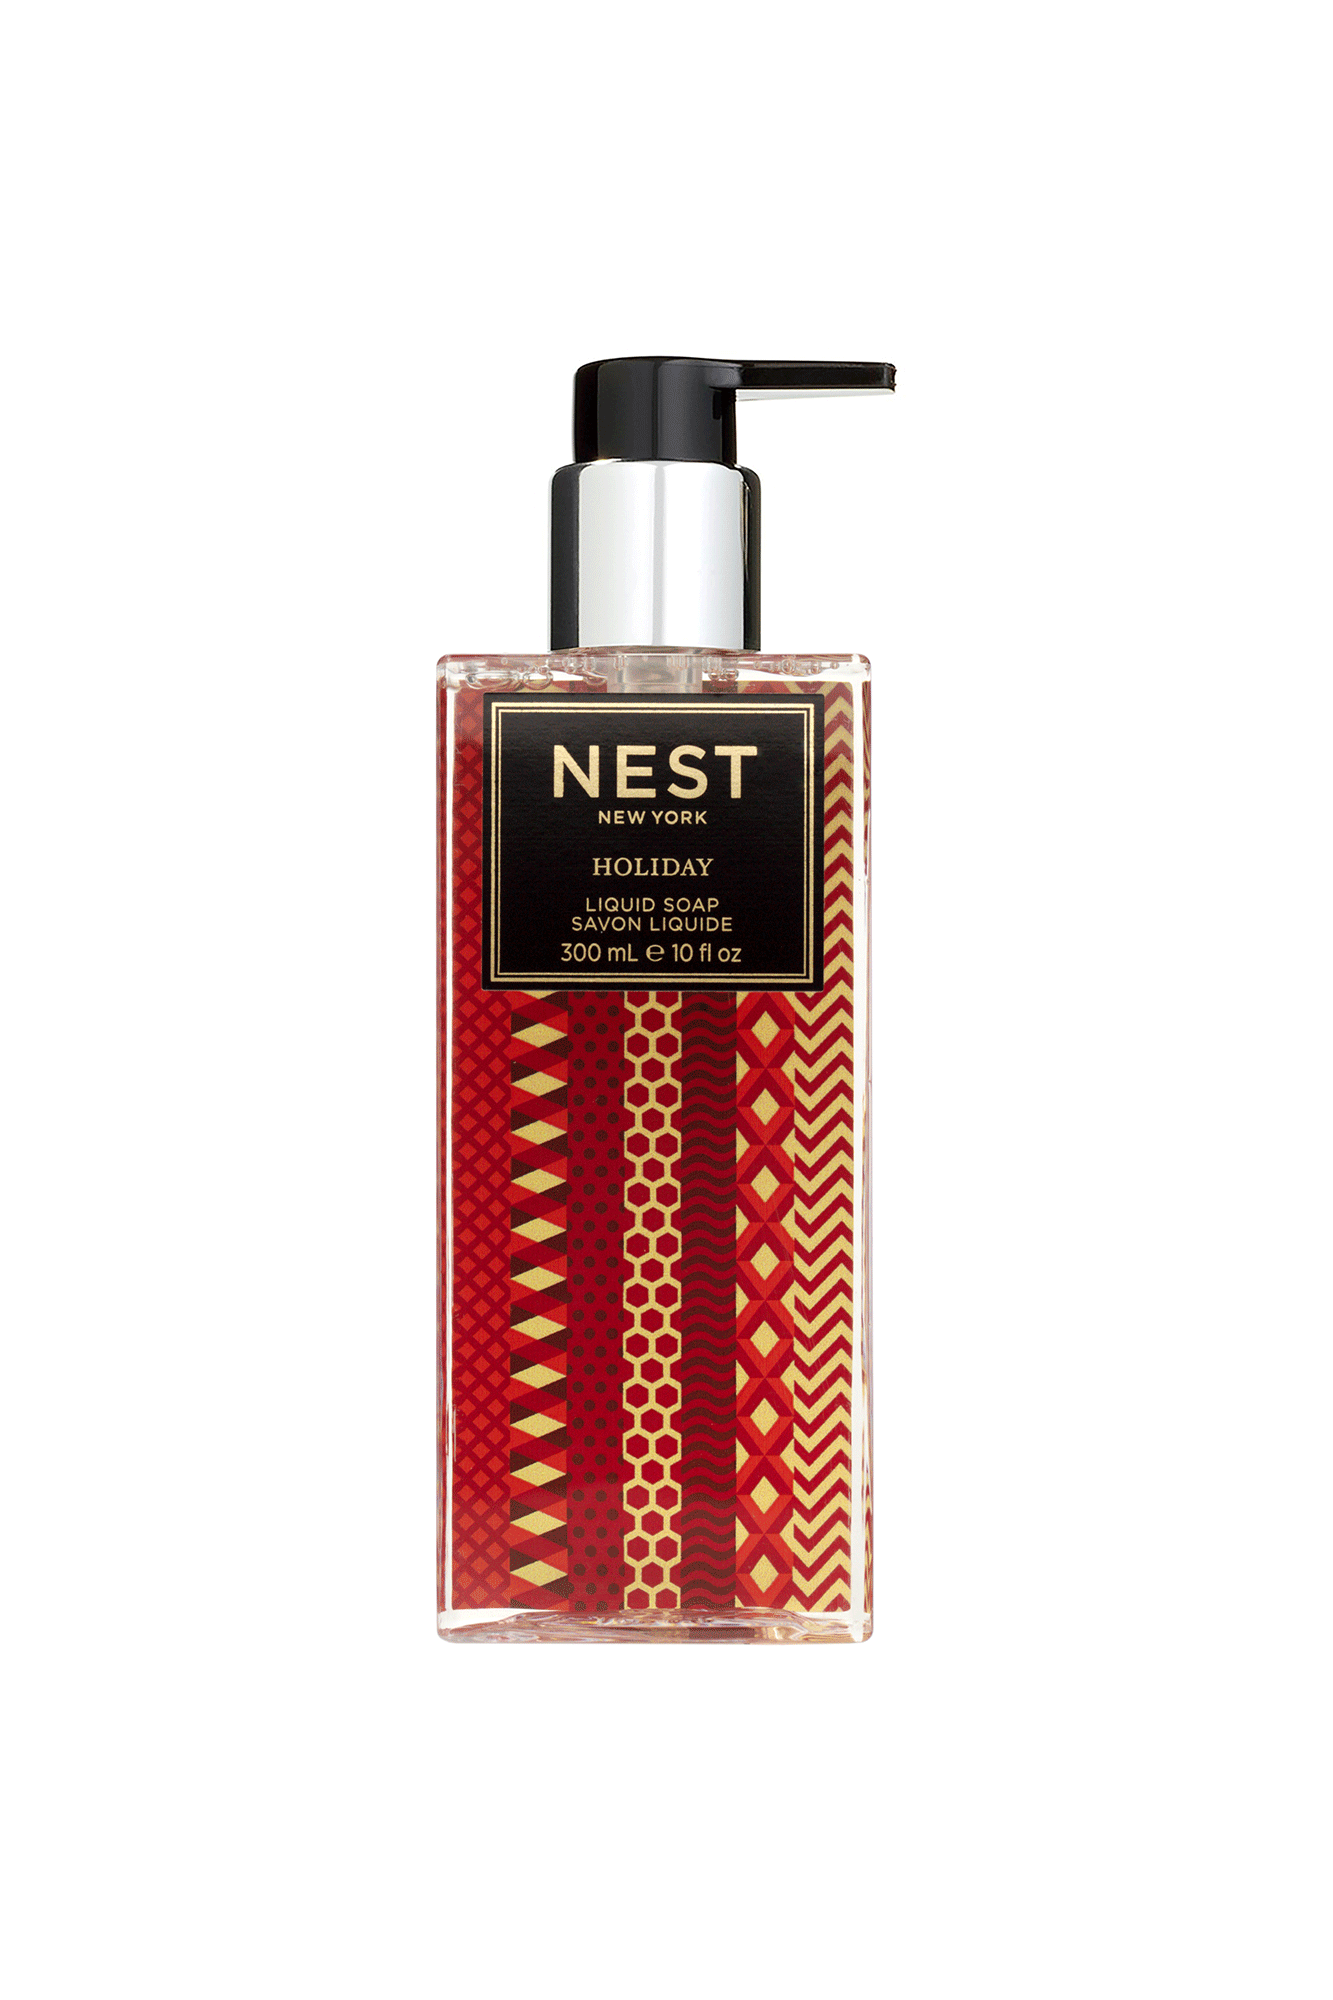 This Holiday Liquid Soap from Nest creates an inviting aroma of the season with its signature blend of pomegranate, mandarin orange, pine, cloves, cinnamon, and a hint of vanilla and amber. With approximately 300 pumps per bottle, you can enjoy the classic scent all season long.